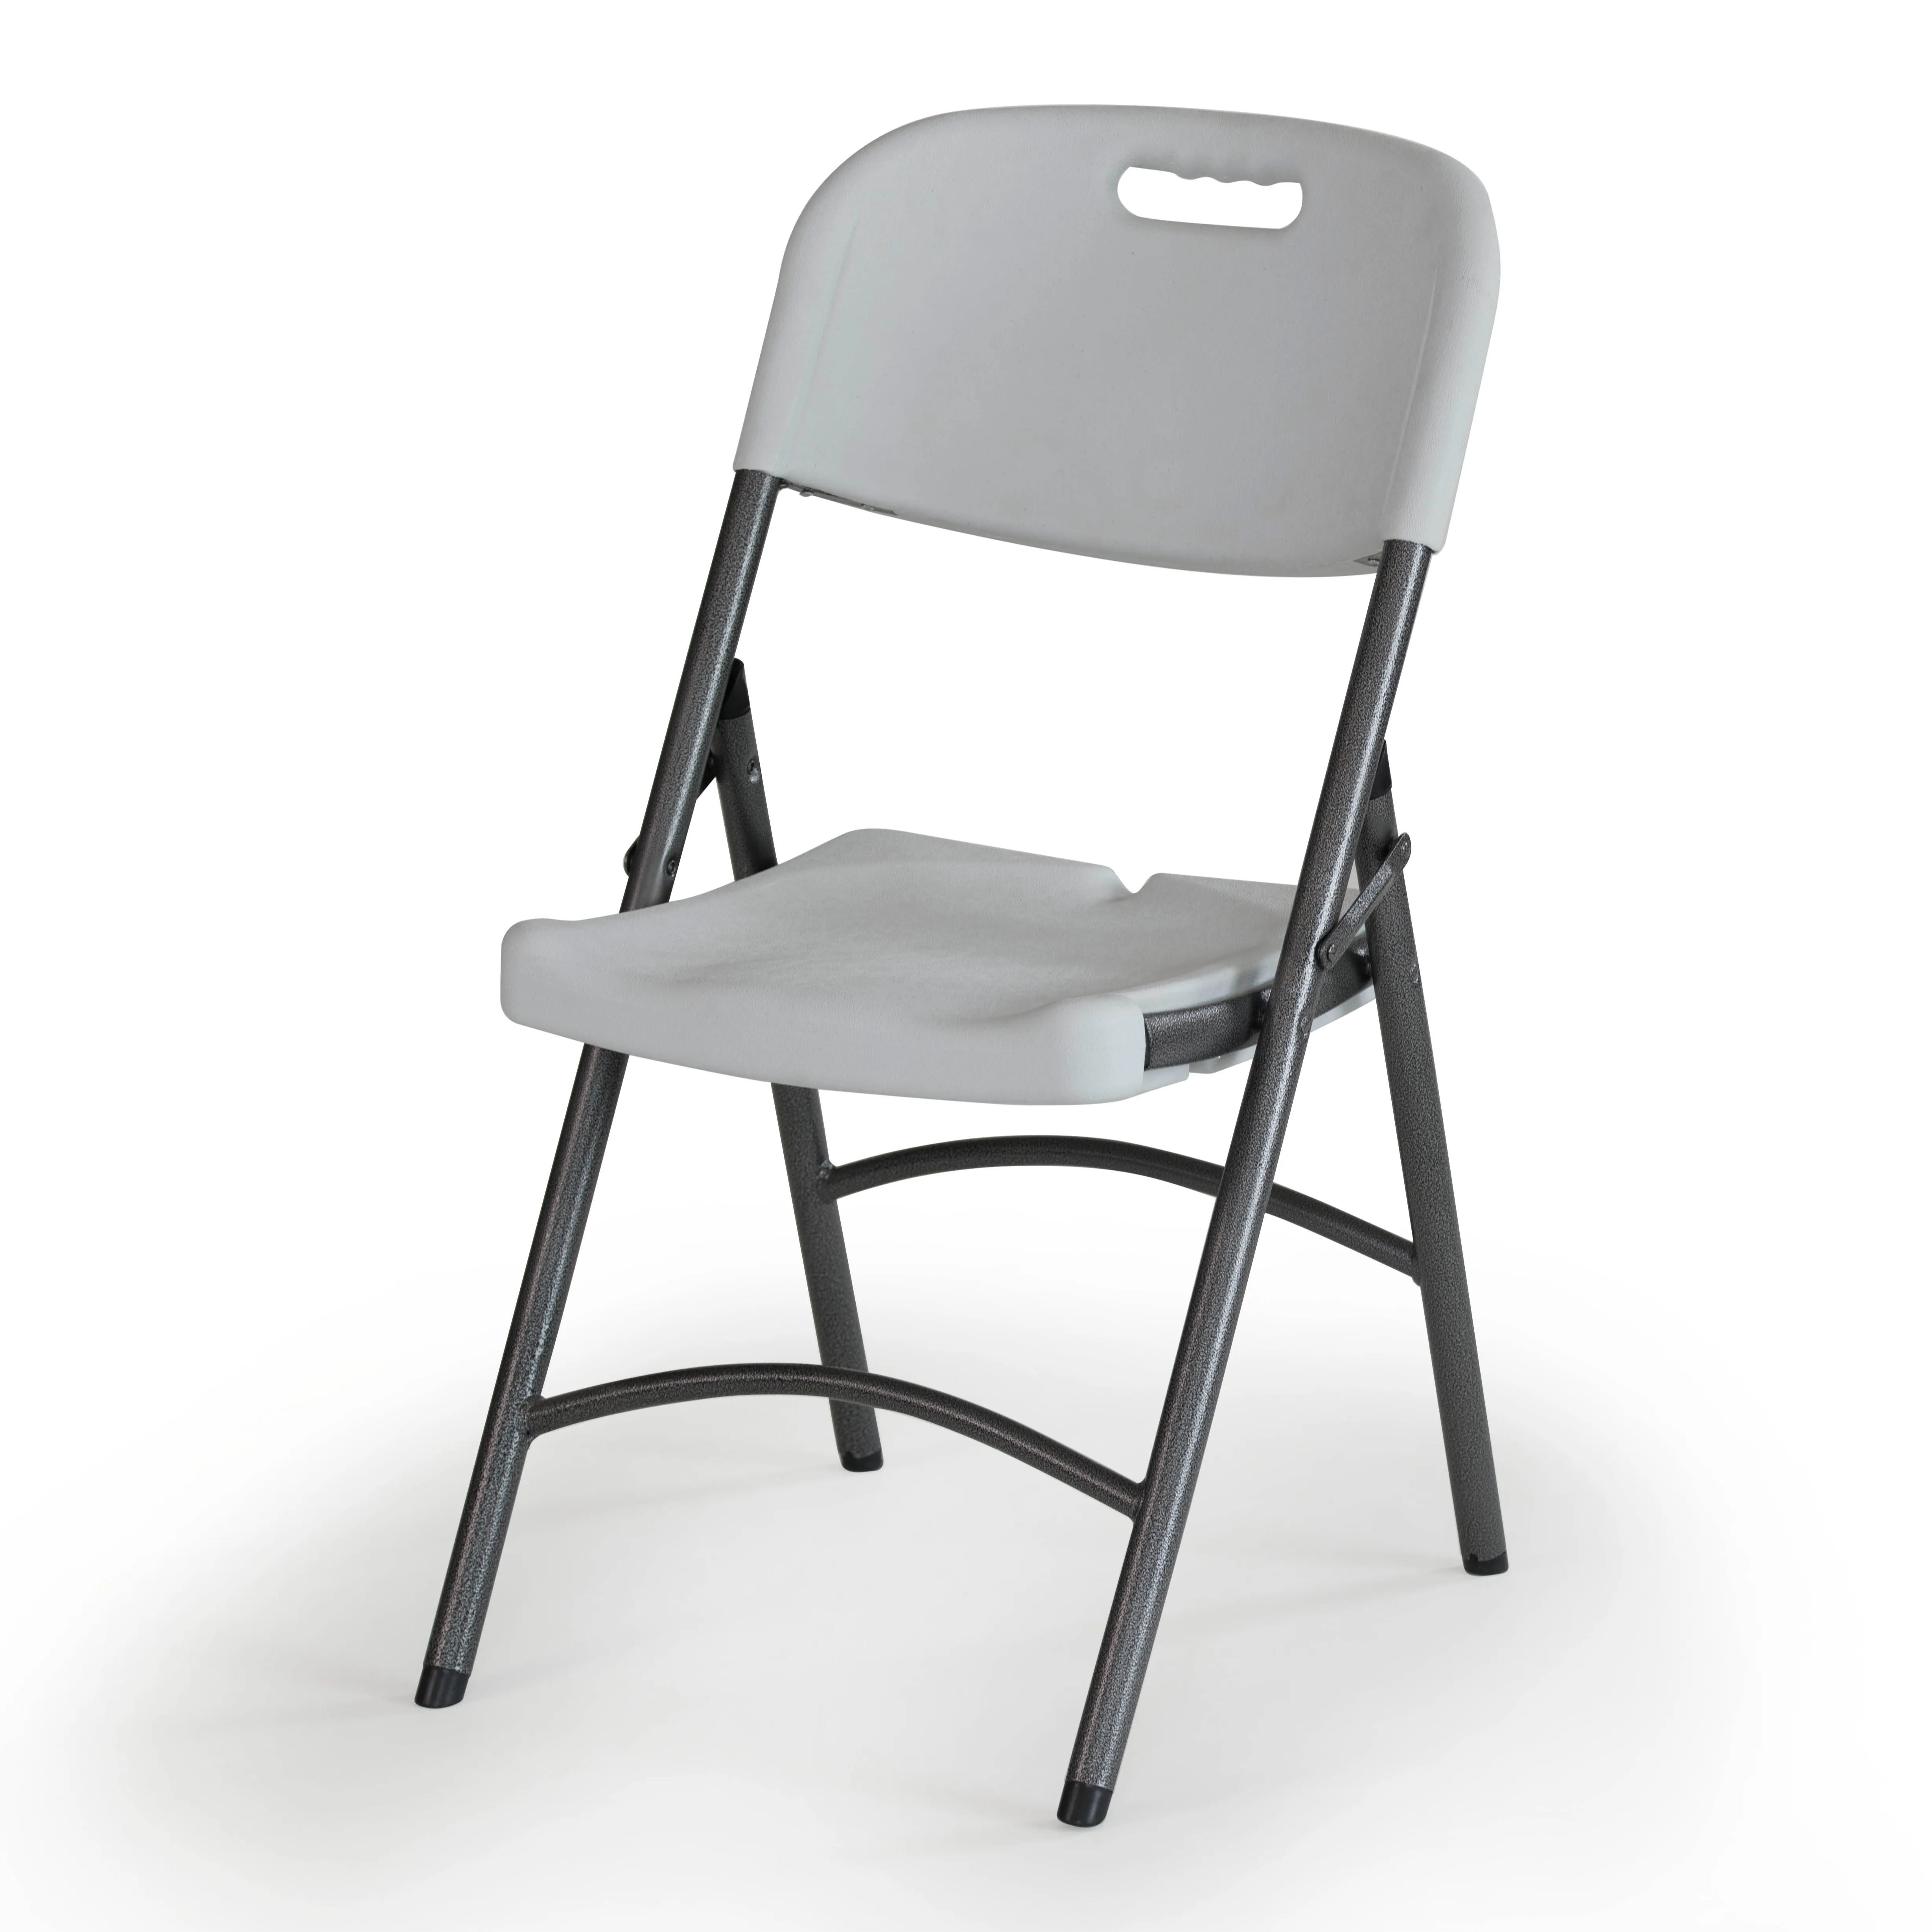 High quality portable white folding chair folded for events parties